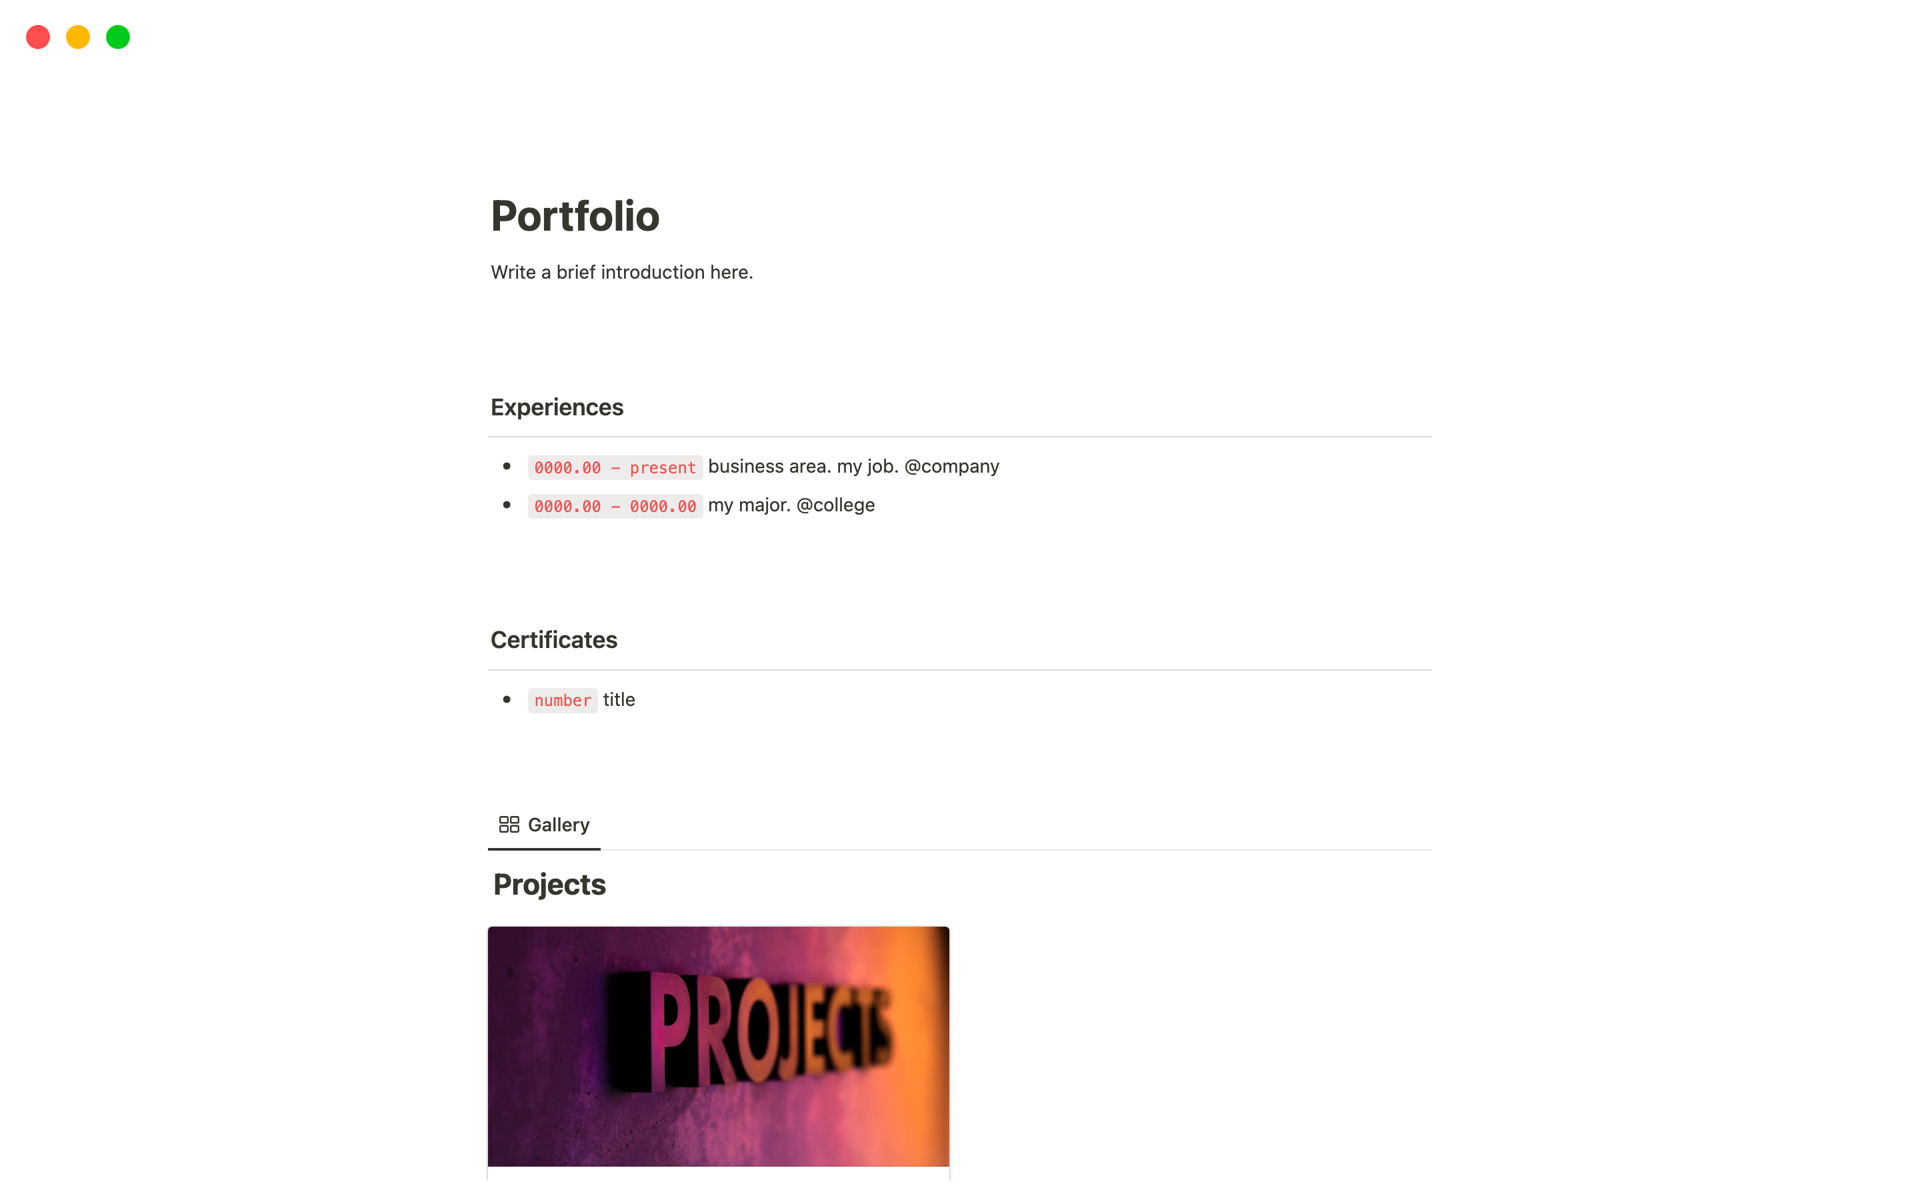 Simply fill in your content to create a beautiful portfolio.